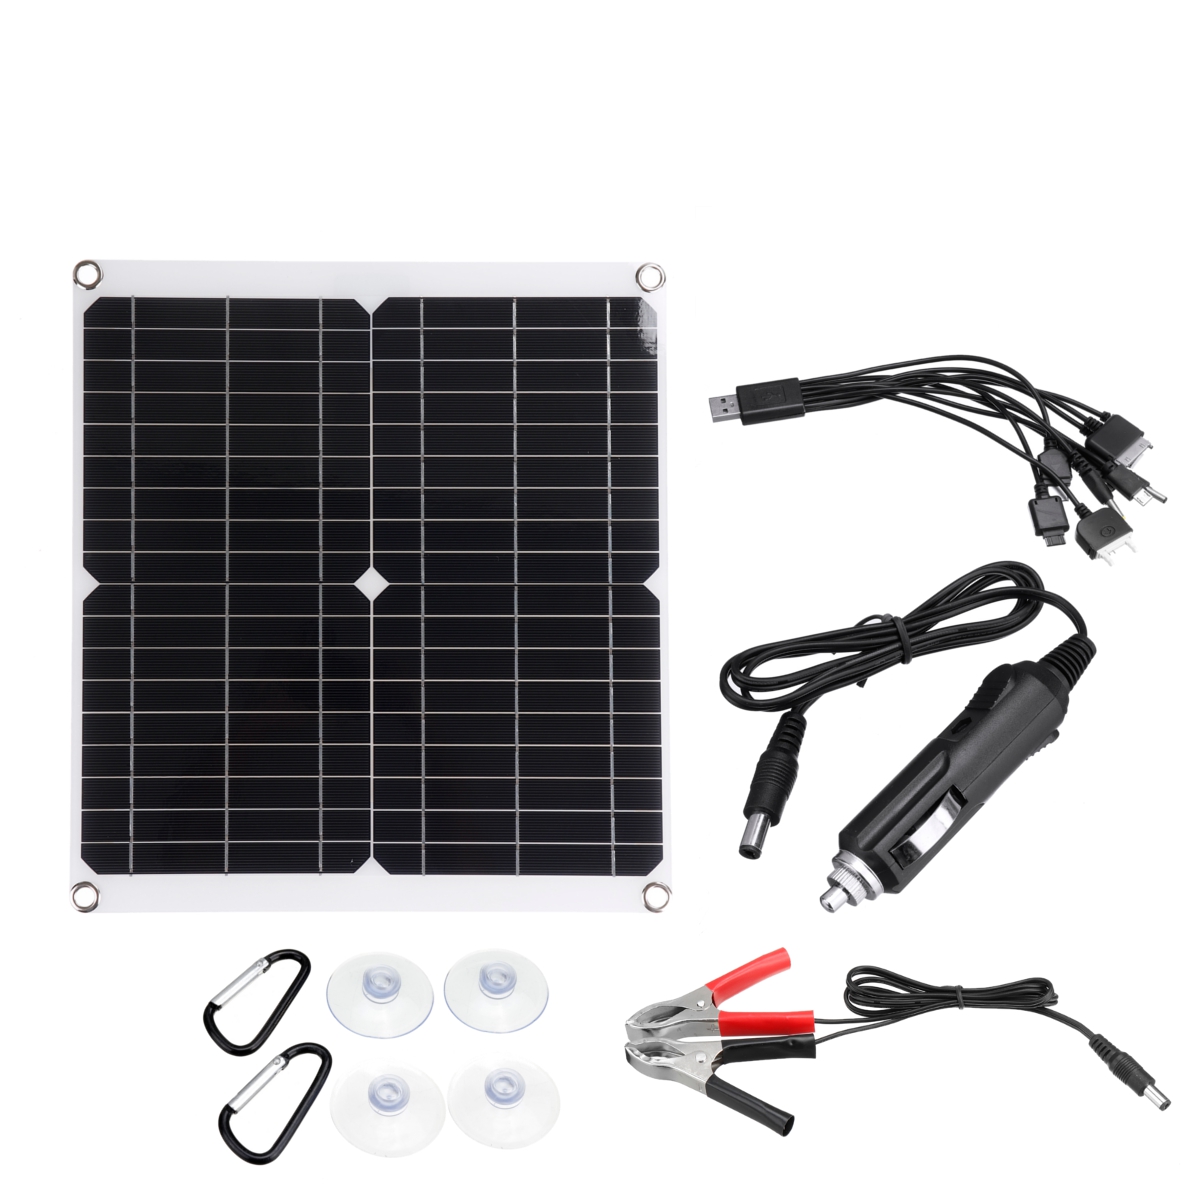 18V-50W-PV-Solar-Panel-Charger-Kit-Monocrystalline-Solar-Panels-with-10-In-1-Adapter-Cable-1779937-3